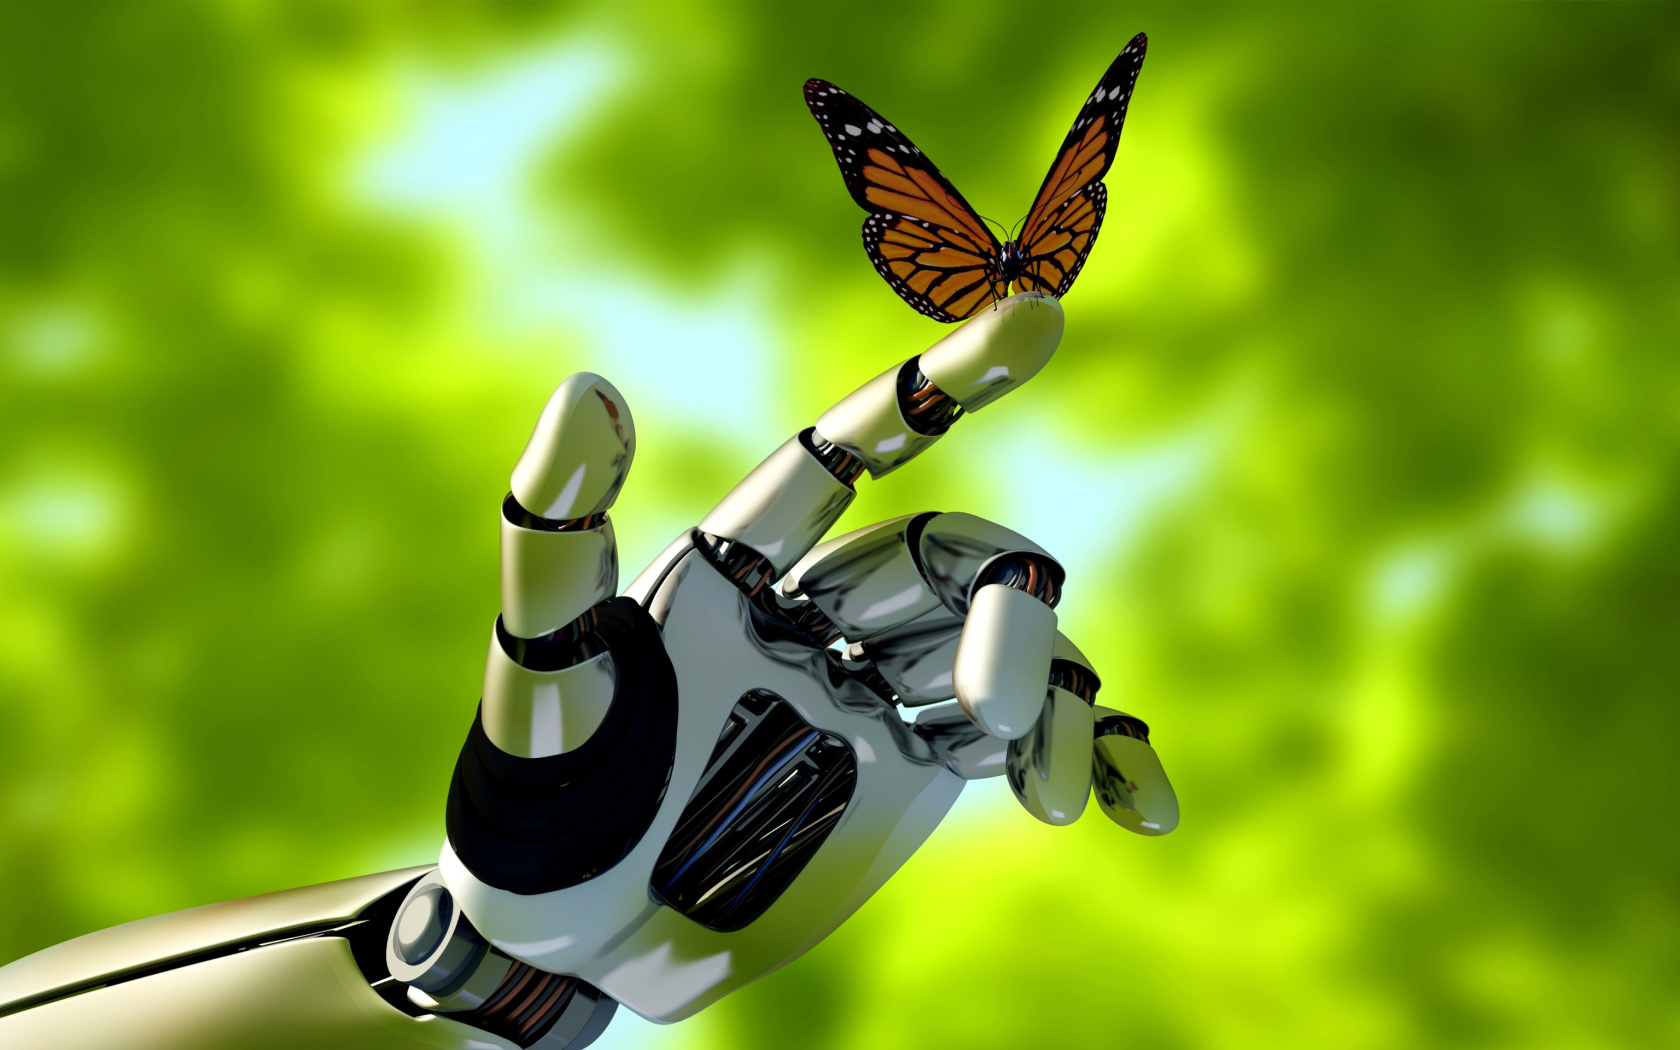 Robot hand and butterfly wallpaper 1680x1050